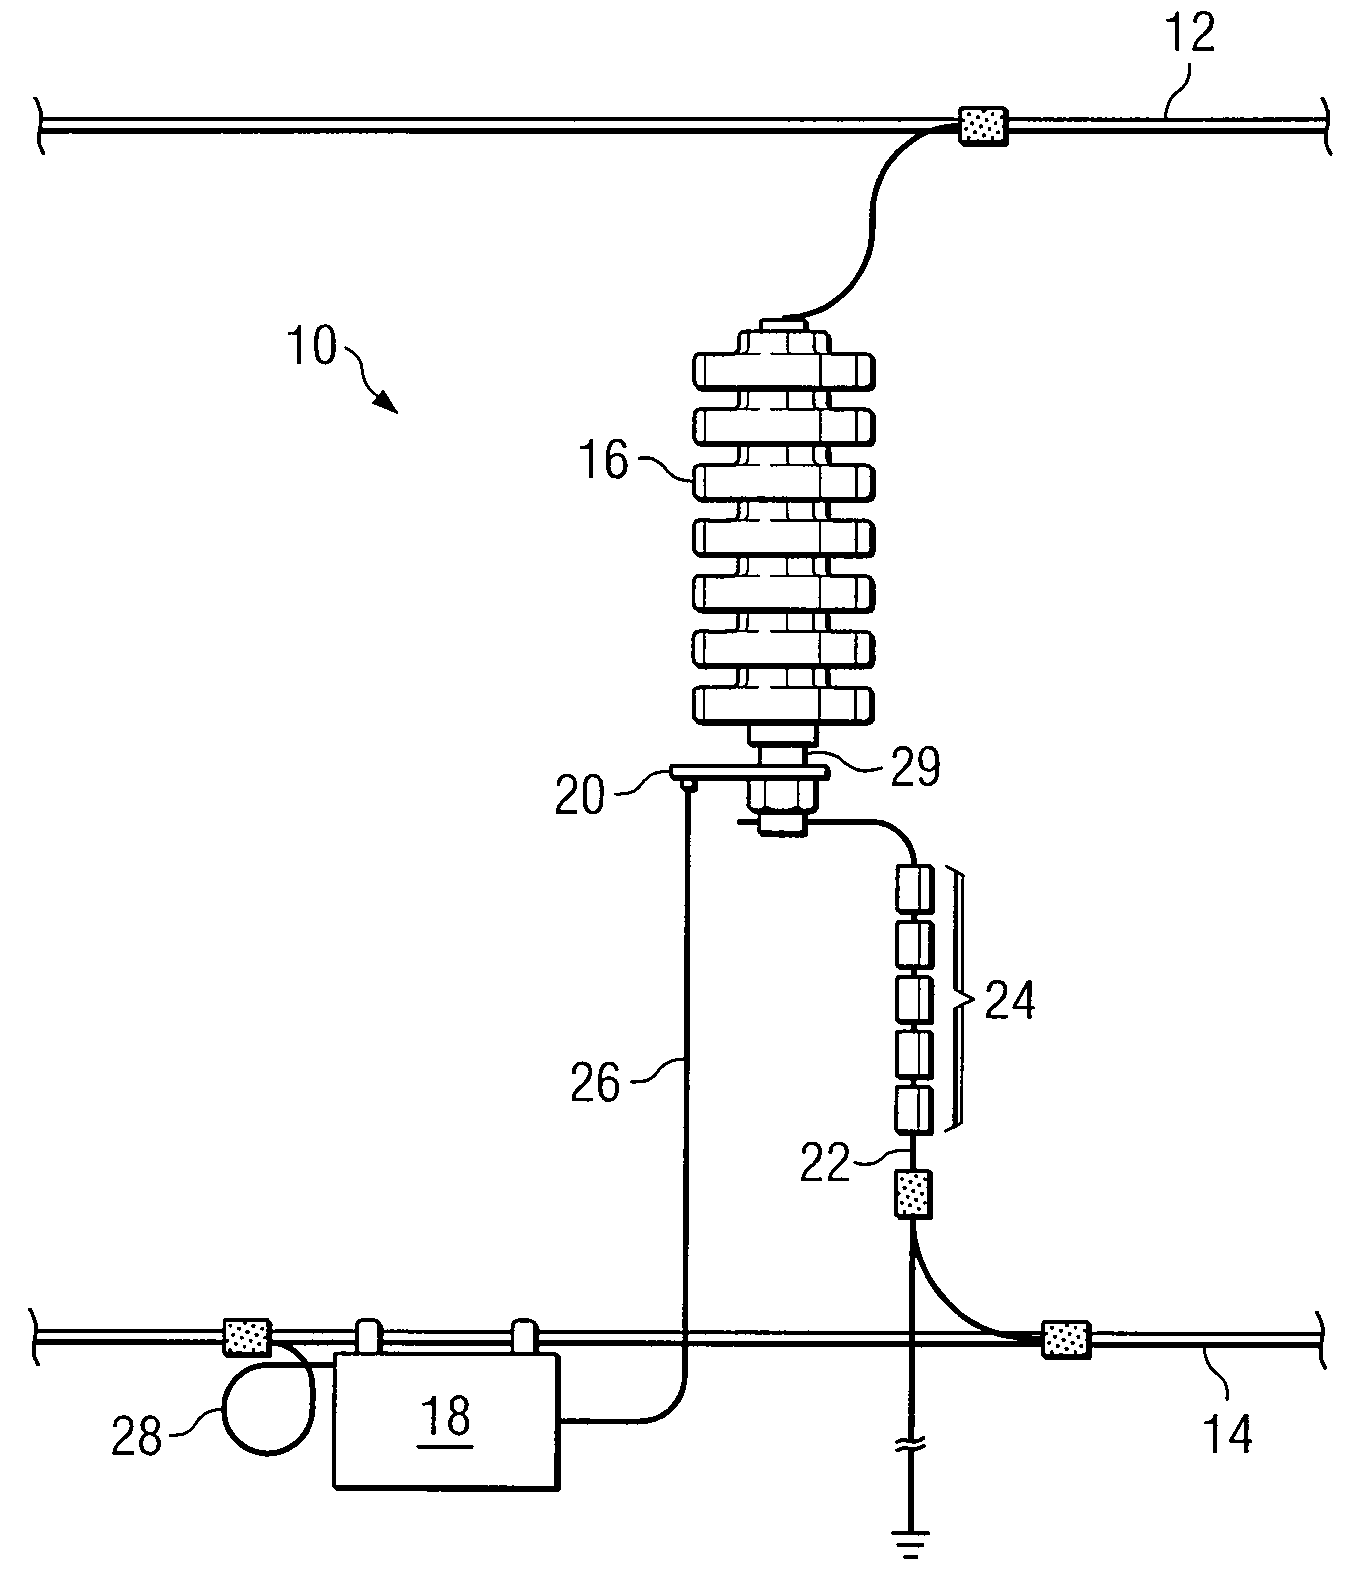 Improved Coupling of Communications Signals to a Power Line